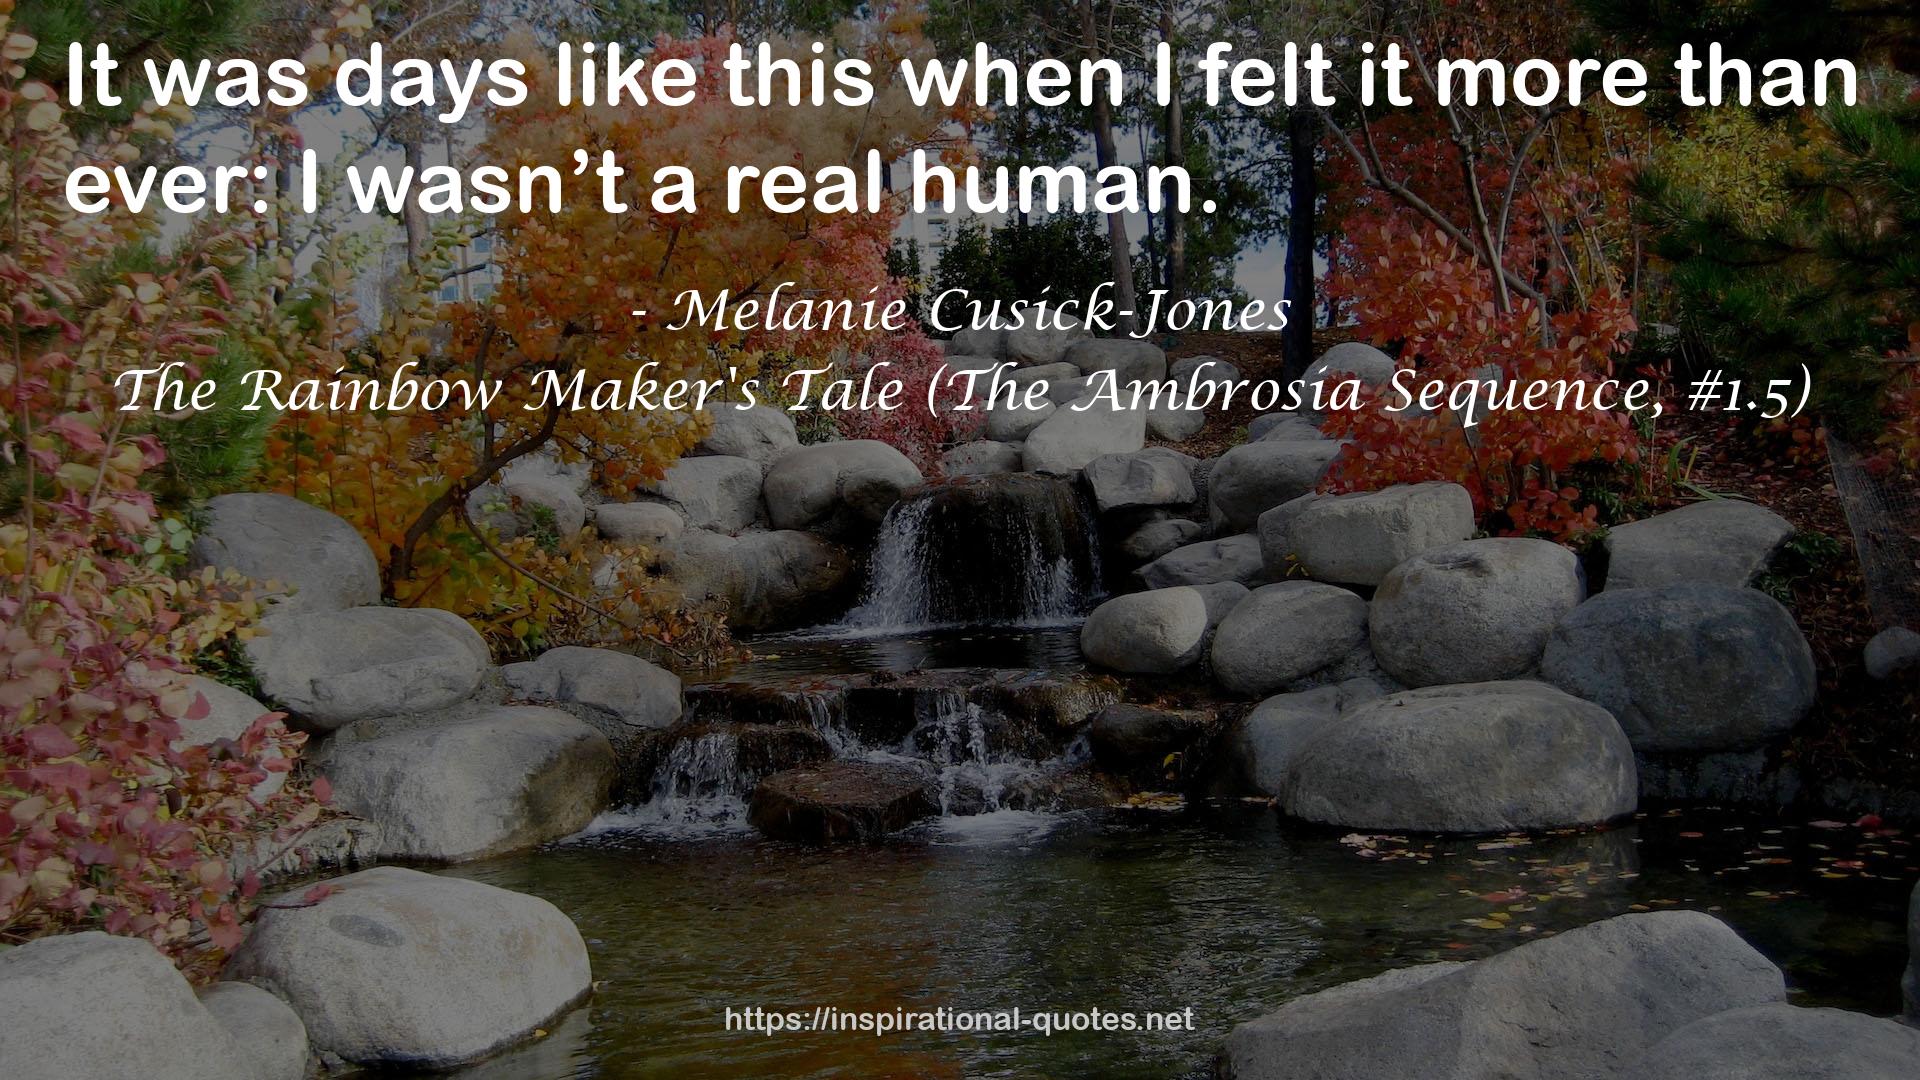 The Rainbow Maker's Tale (The Ambrosia Sequence, #1.5) QUOTES